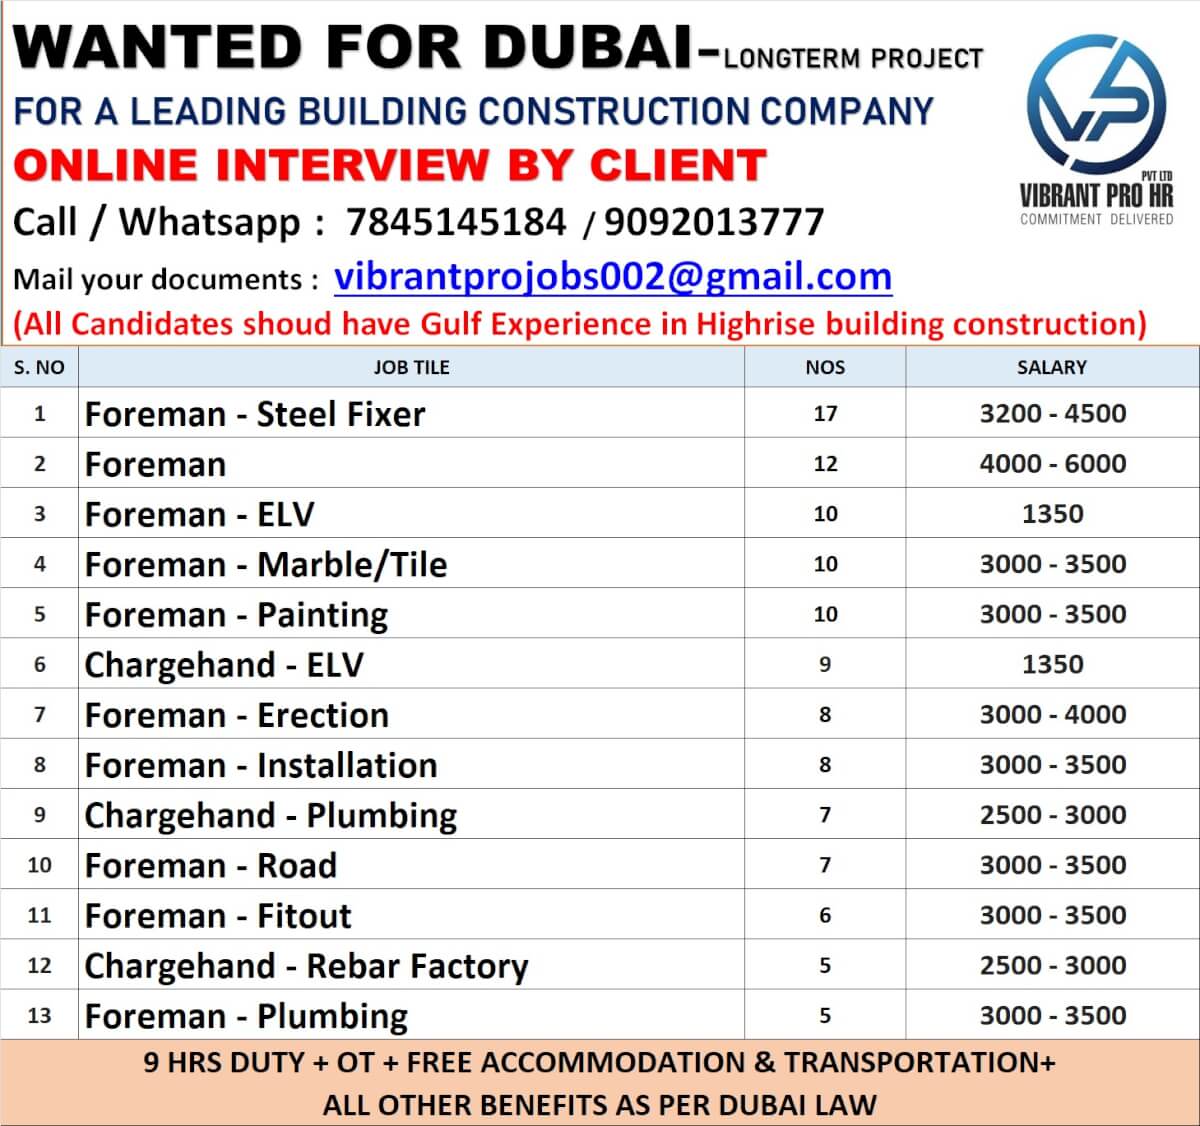 WANTED FOR DUBAI-LONGTERM PROJECT -FOR A LEADING BUILDING CONSTRUCTION COMPANY